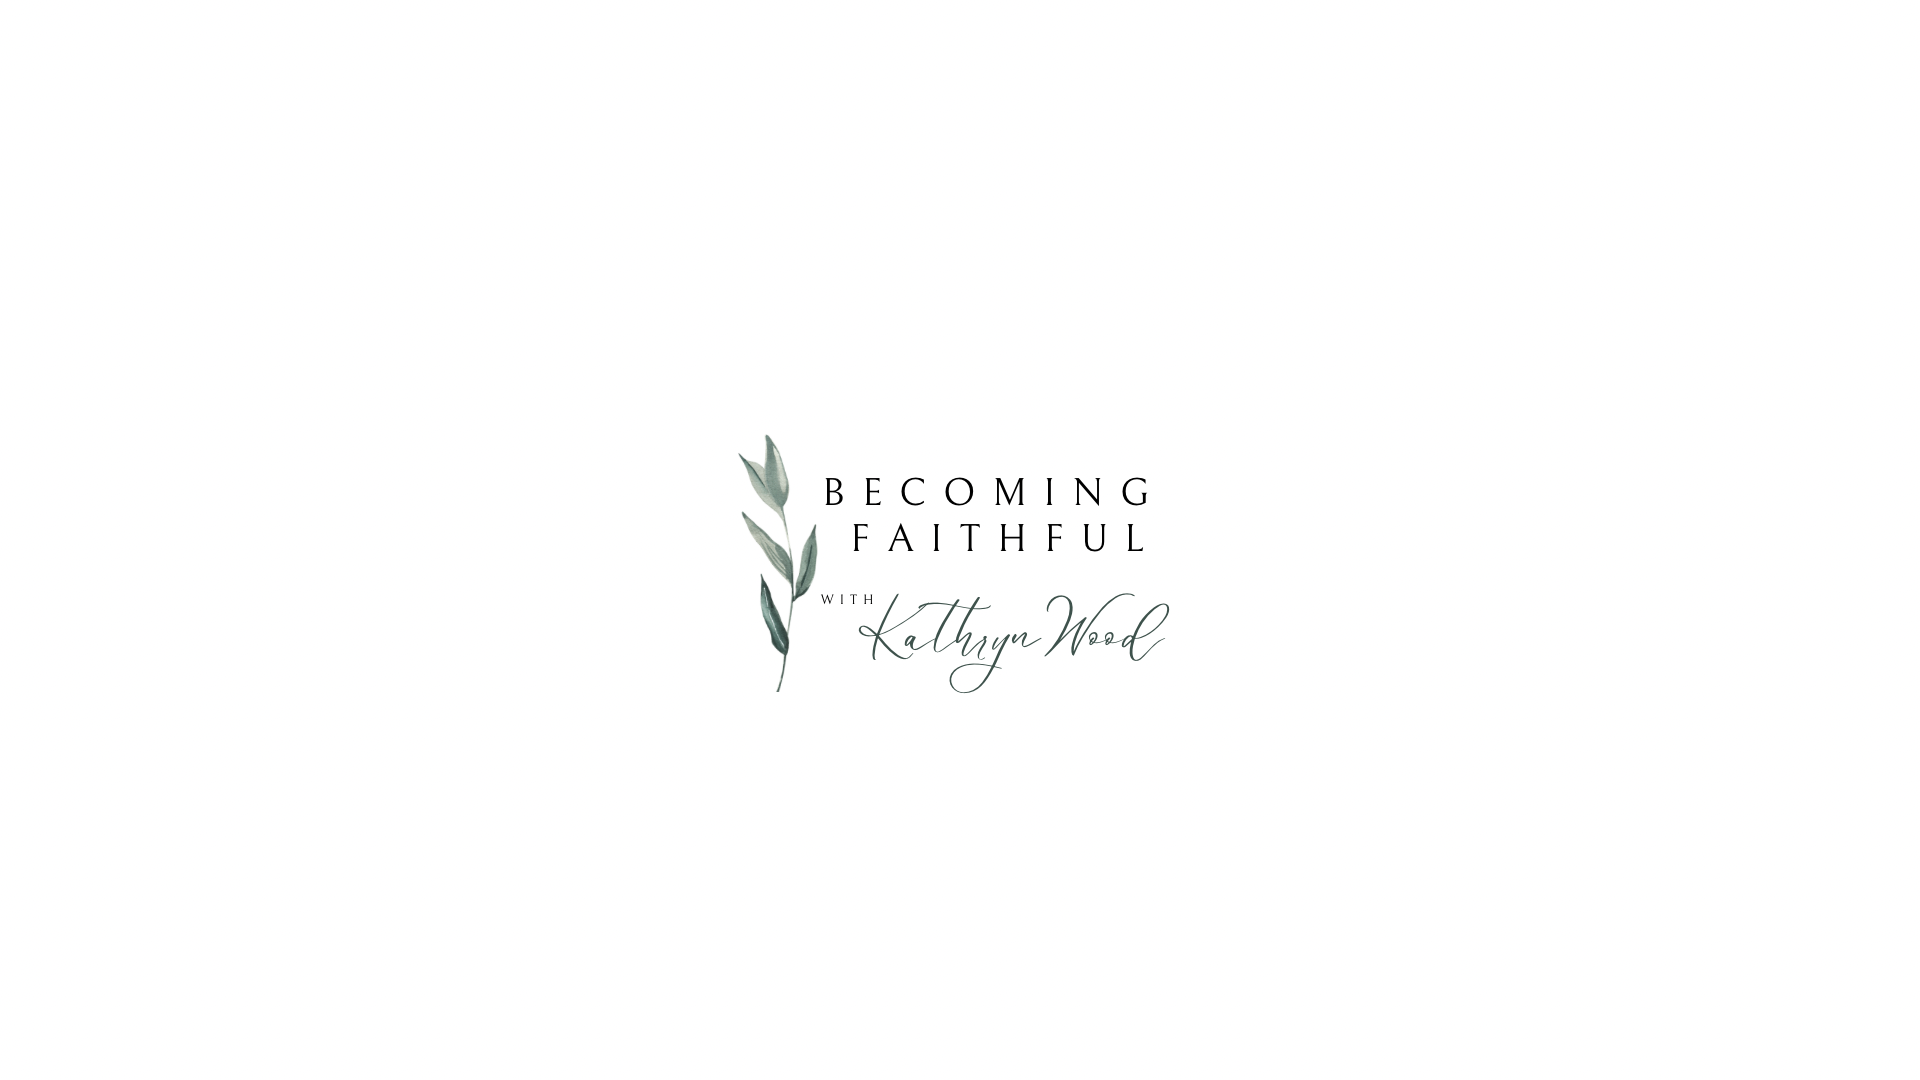 Becoming faithful with Kathryn Wood